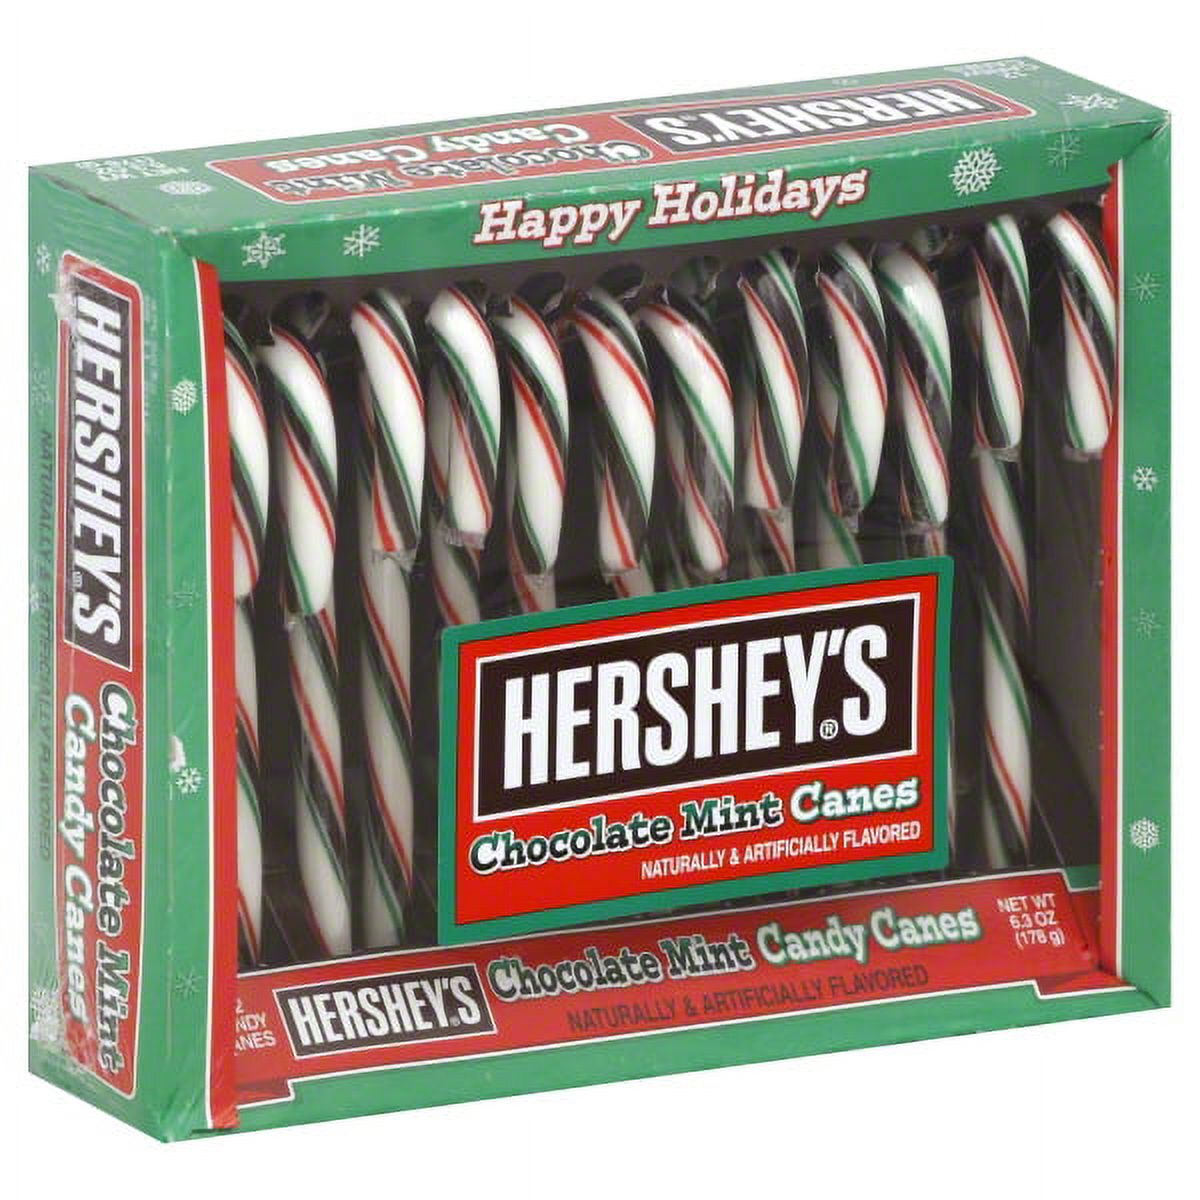 Hershey's Chocolate Mint Candy Canes, 6.3 Oz., 12 Count - image 1 of 4